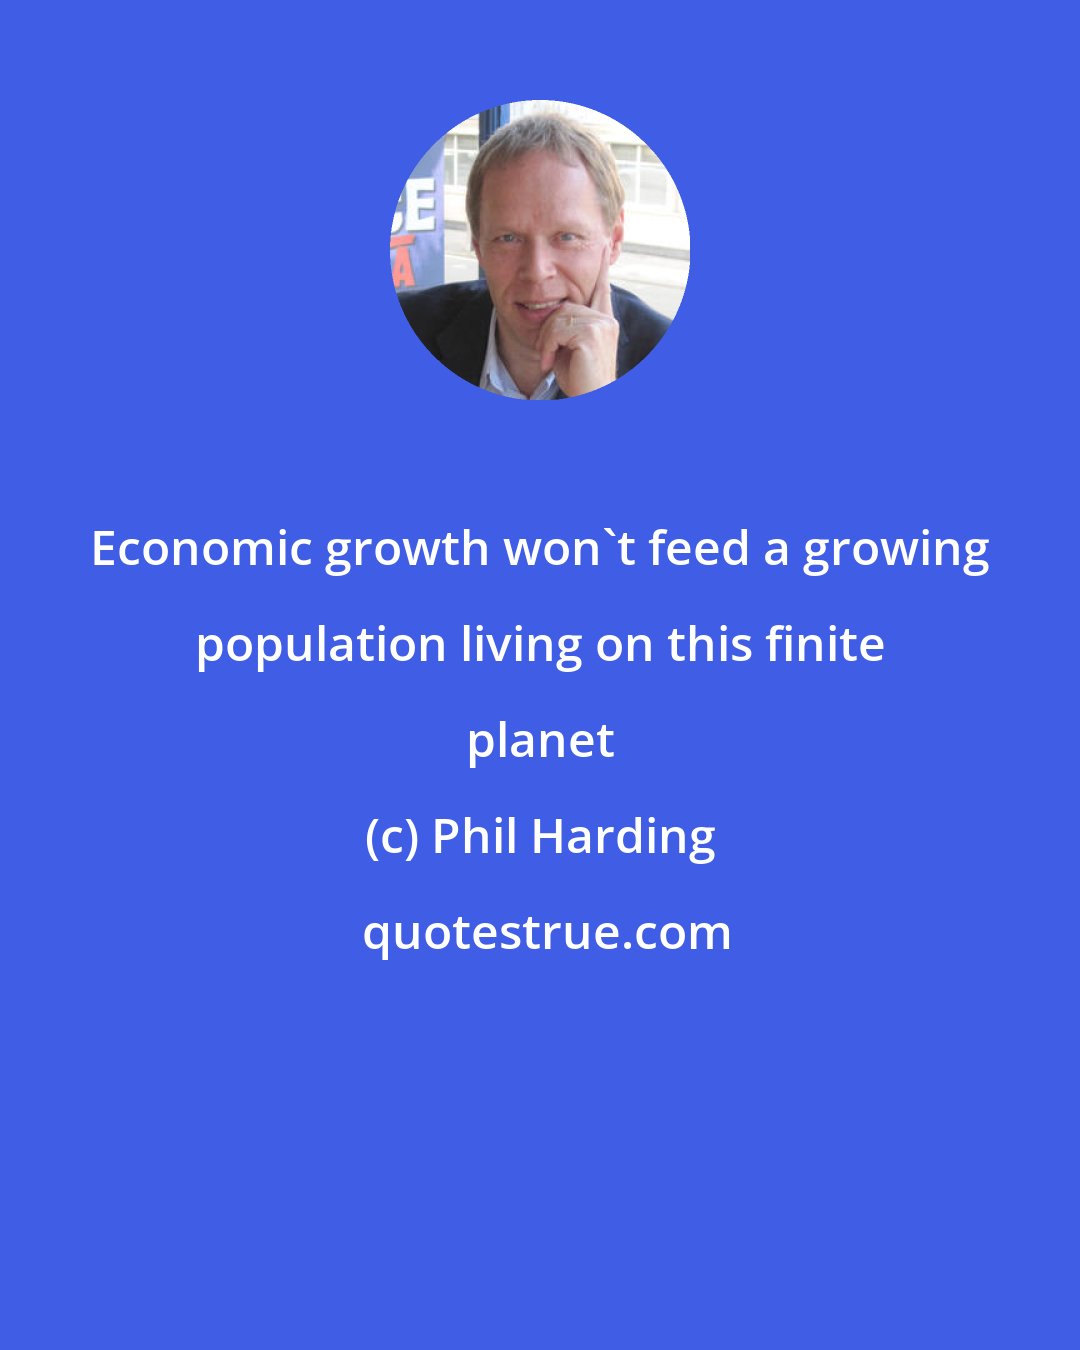 Phil Harding: Economic growth won't feed a growing population living on this finite planet